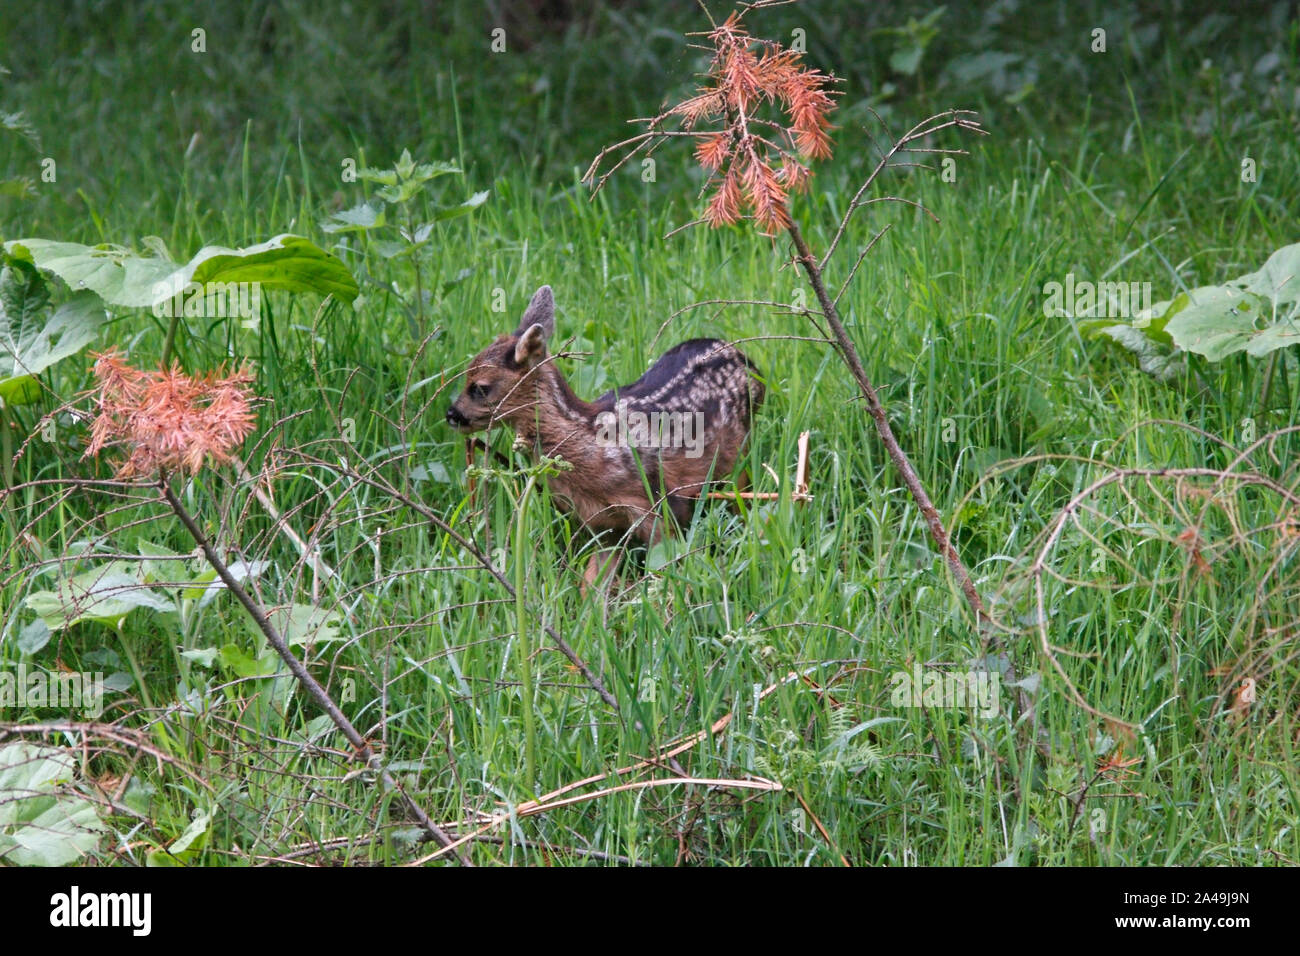 ROE DEER (Capreolus capreolus) fawn or kid seeking out a new hiding place, Scotland, UK. Stock Photo